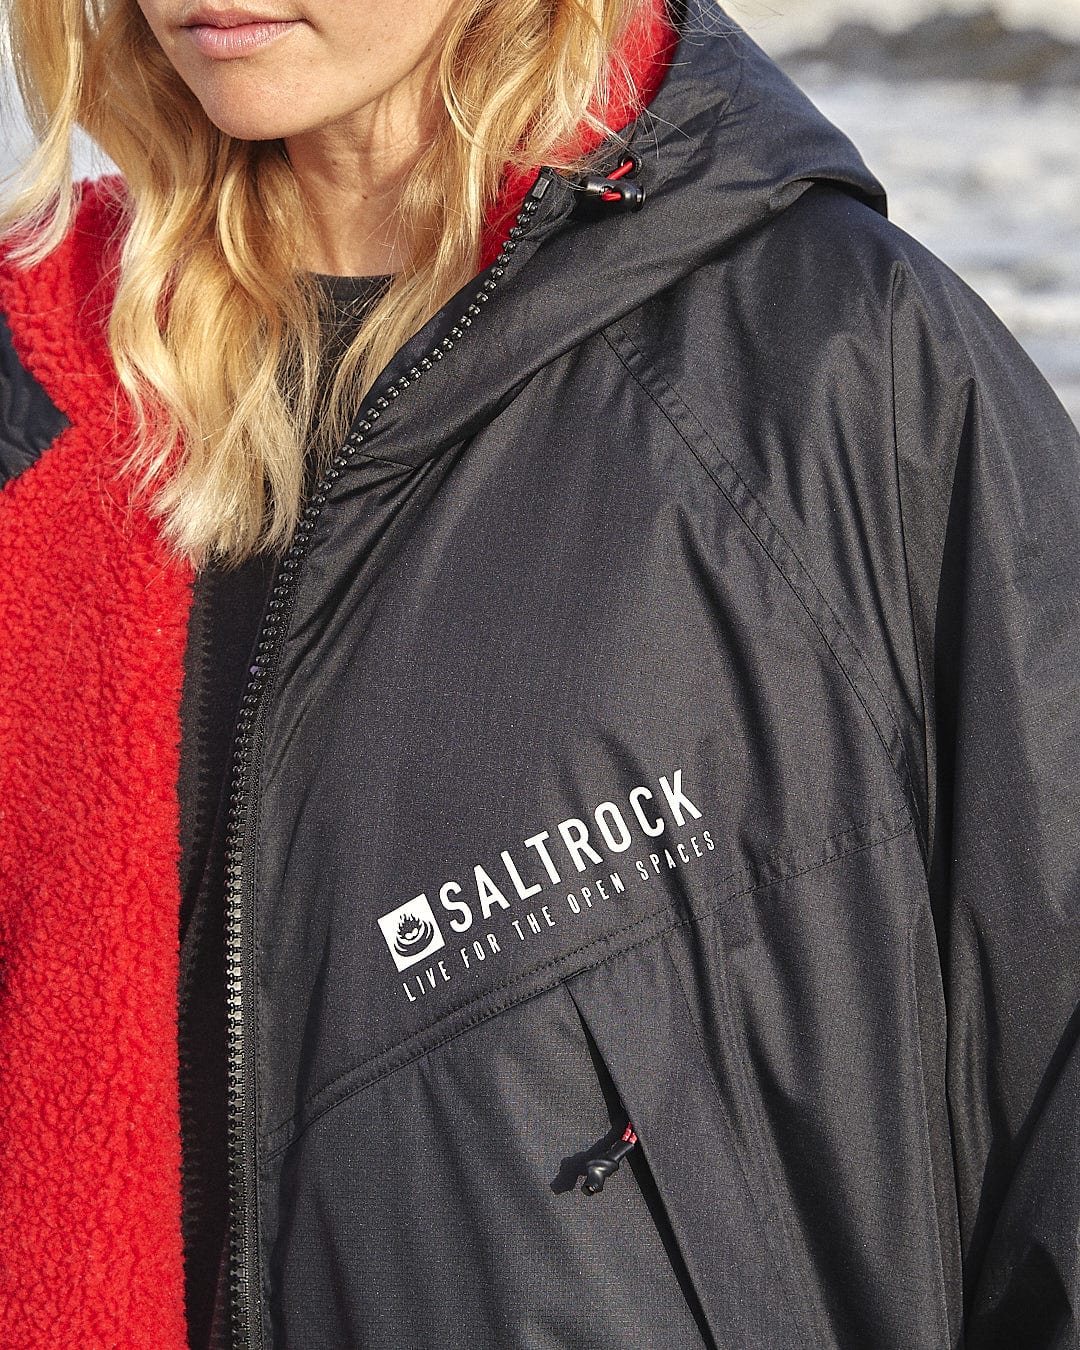 A woman wearing a Saltrock Four Seasons - Waterproof Changing Robe - Black/Red on the beach.